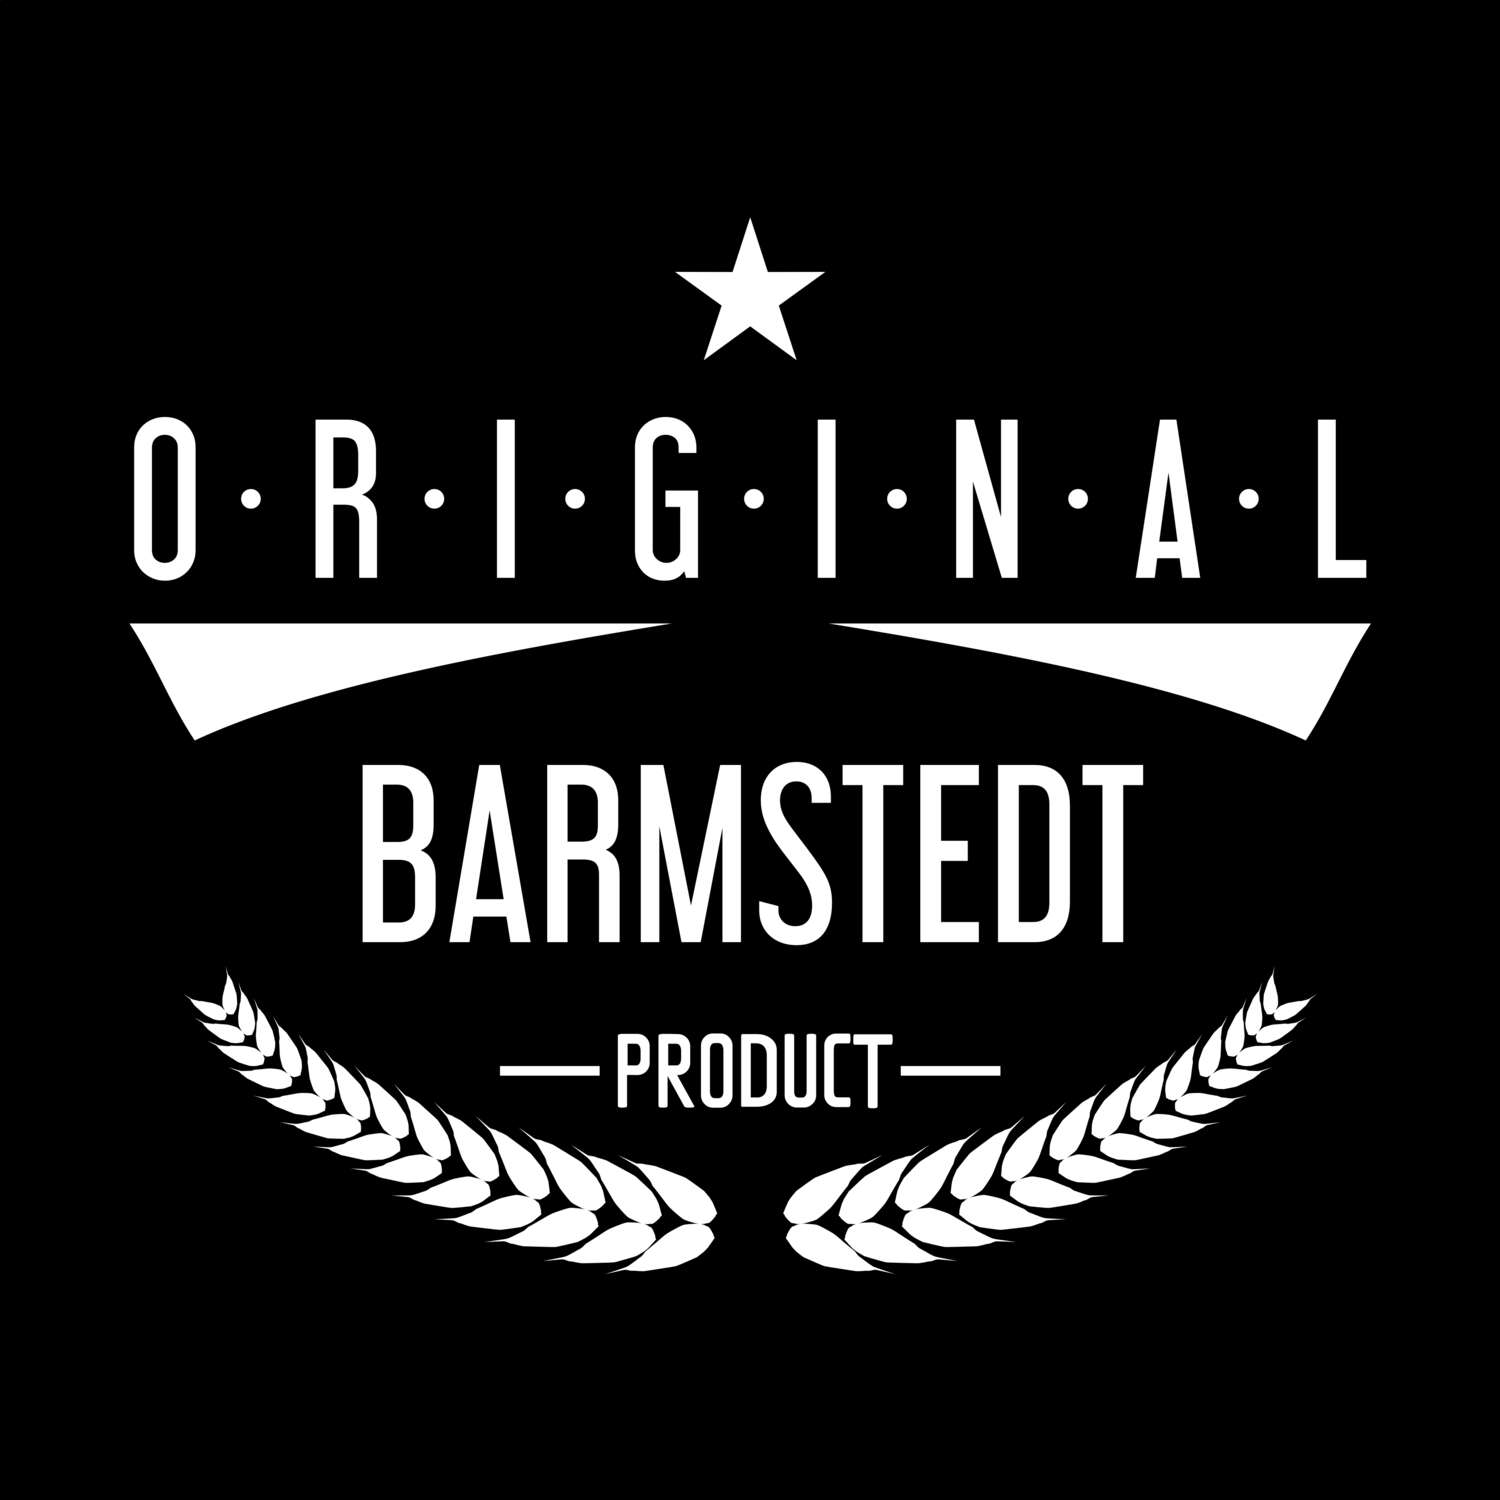 Barmstedt T-Shirt »Original Product«